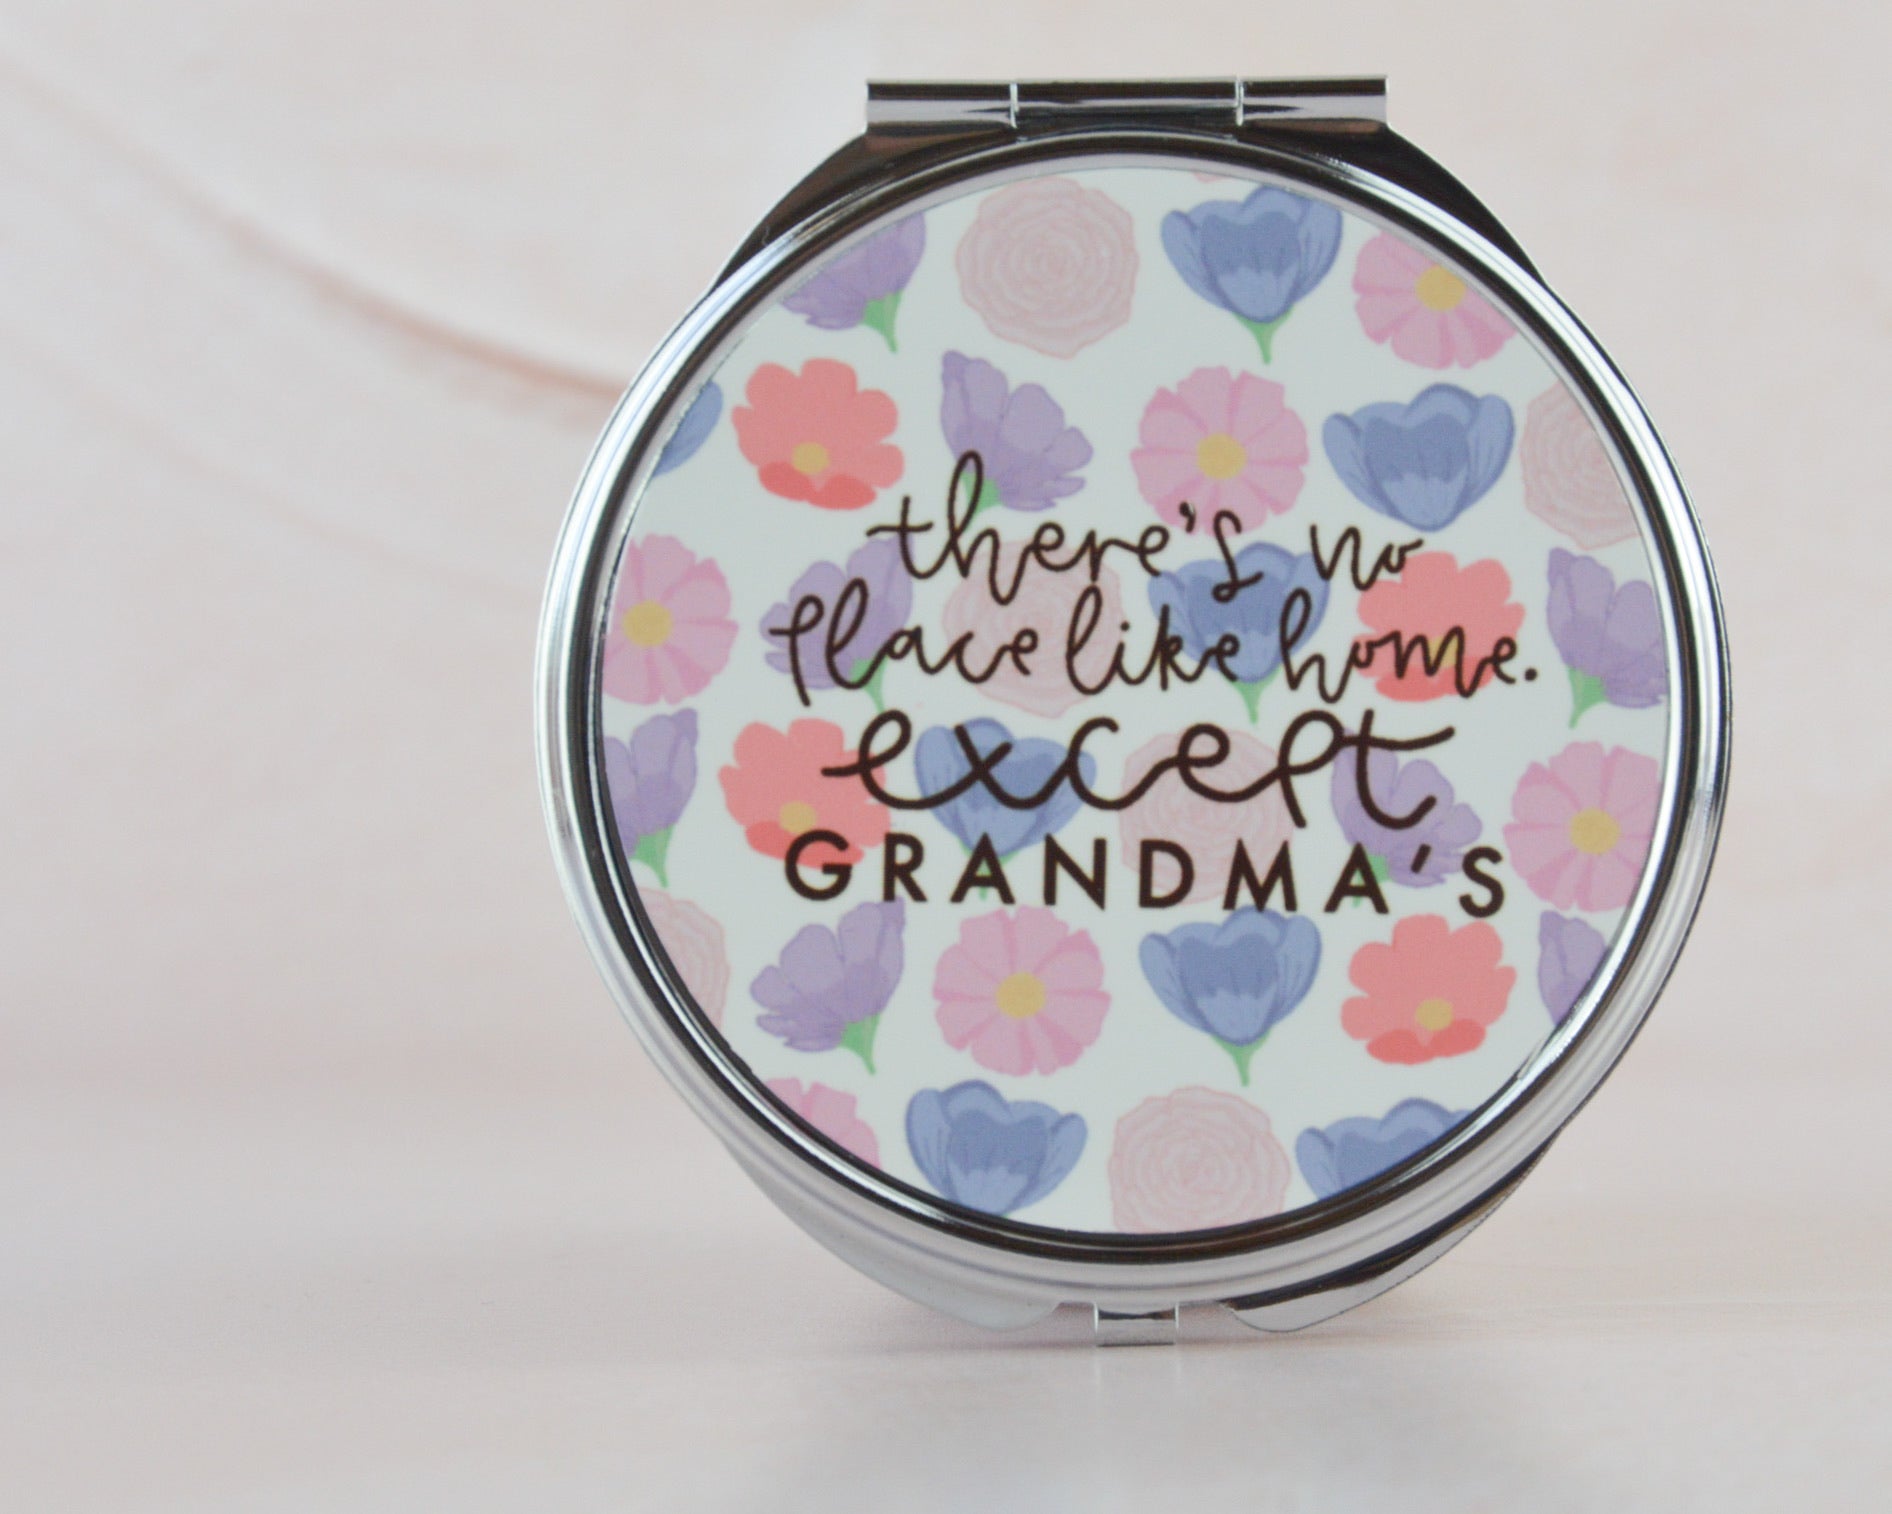 There's No Place Like Home, Except Grandma's Compact Mirror